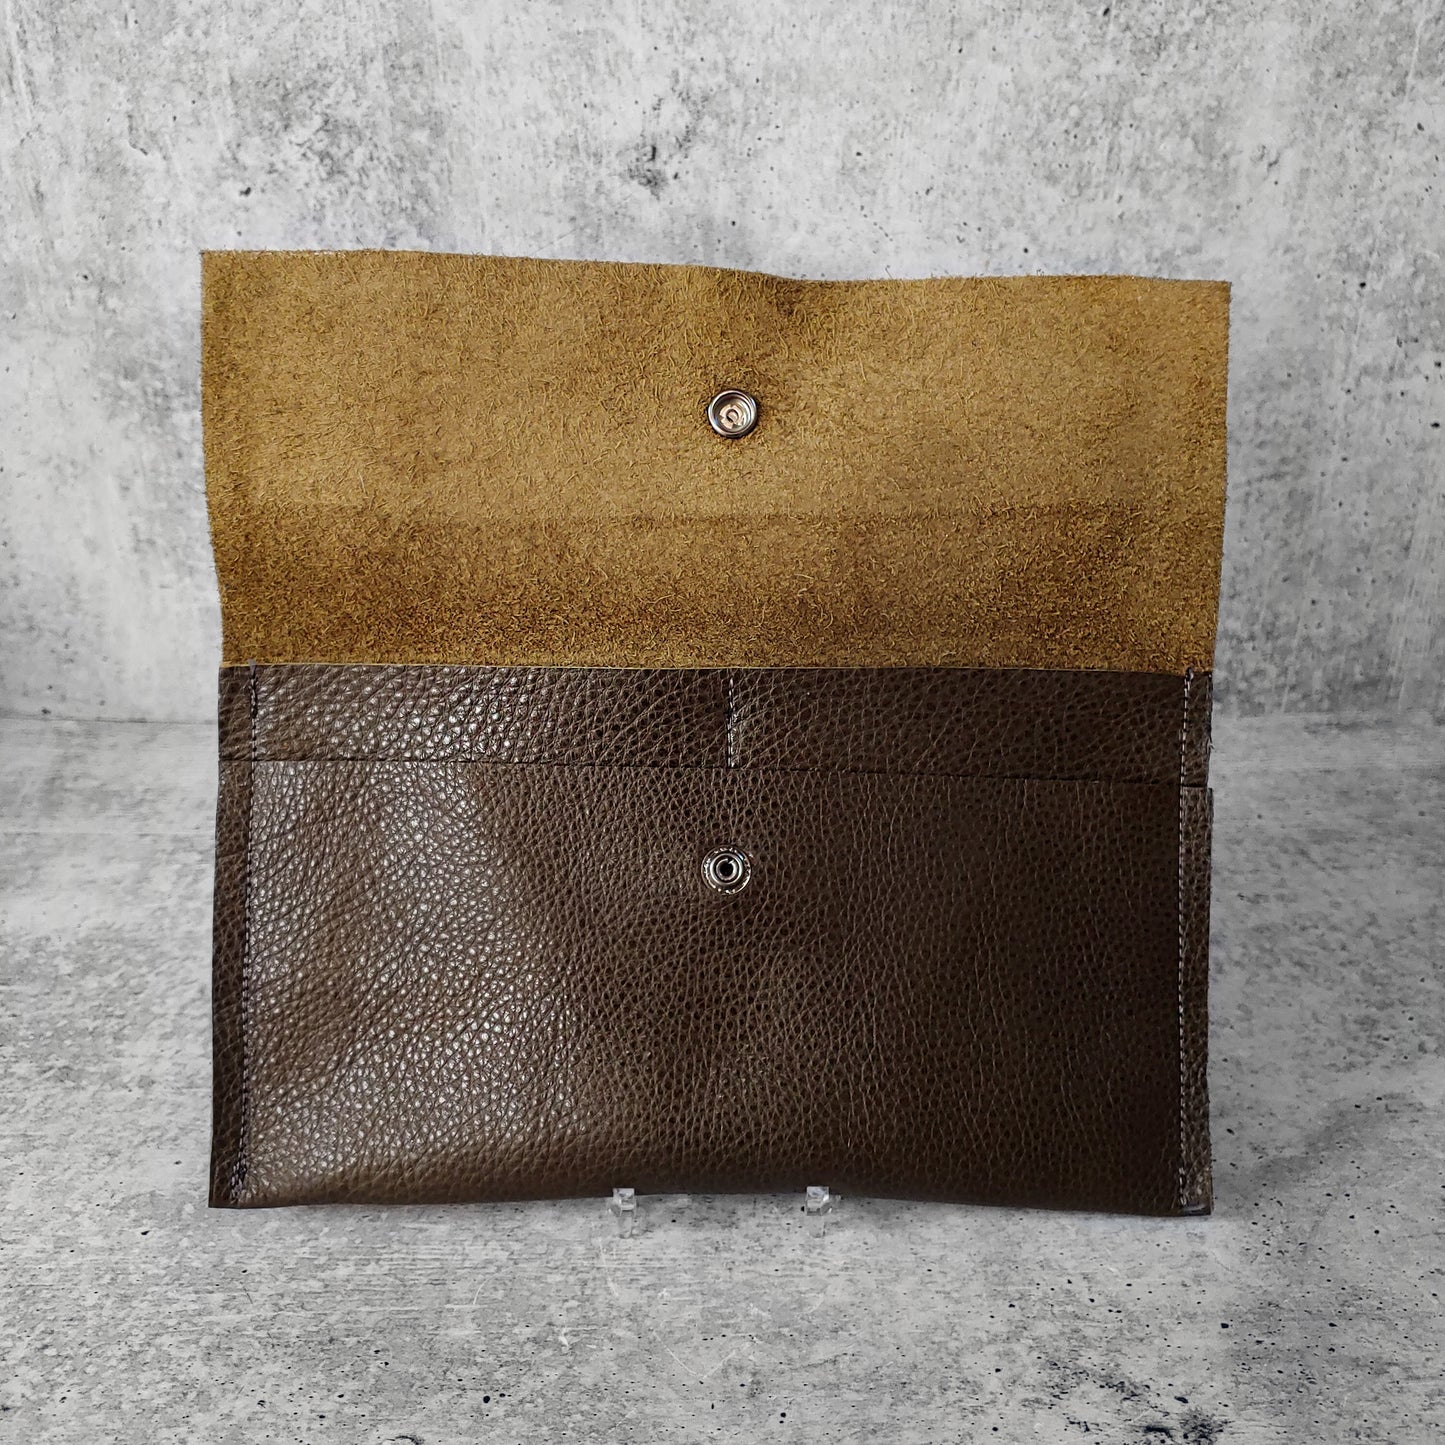 Raw Soft Leather Wallet Clutch : Seaweed